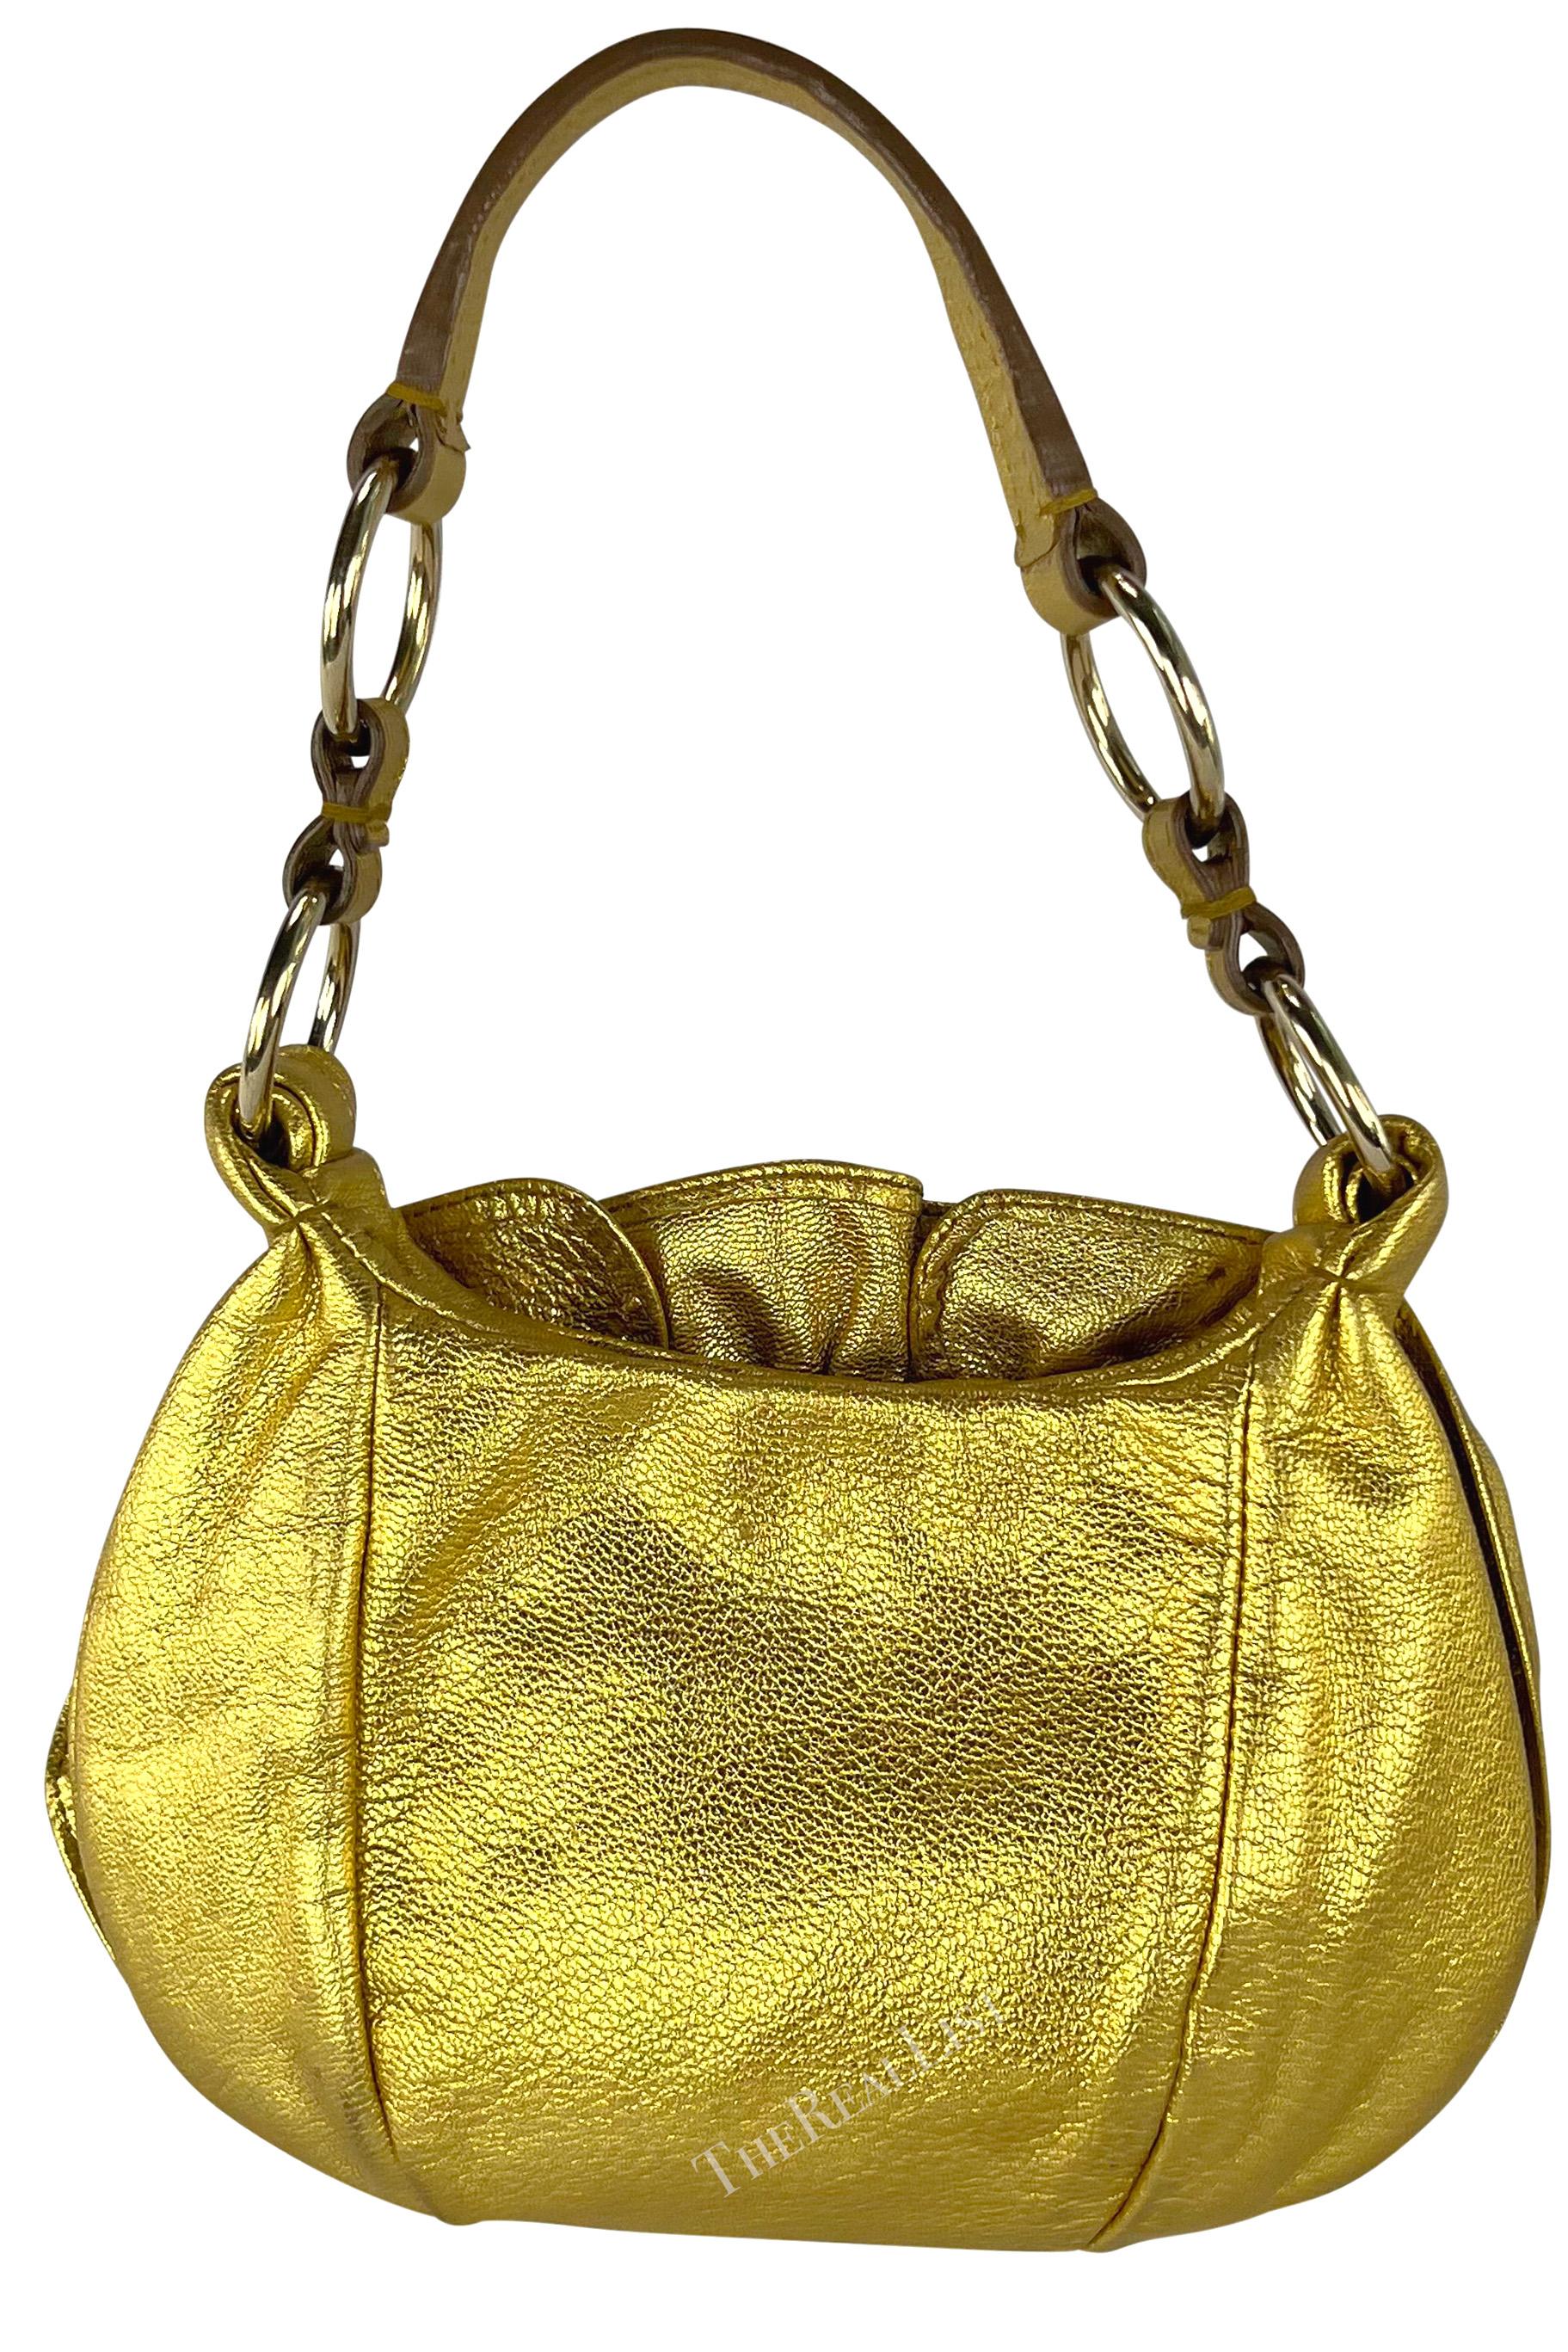 2000s Yves Saint Laurent by Tom Ford Gold Metallic Leather Floral Mini Bag For Sale 1